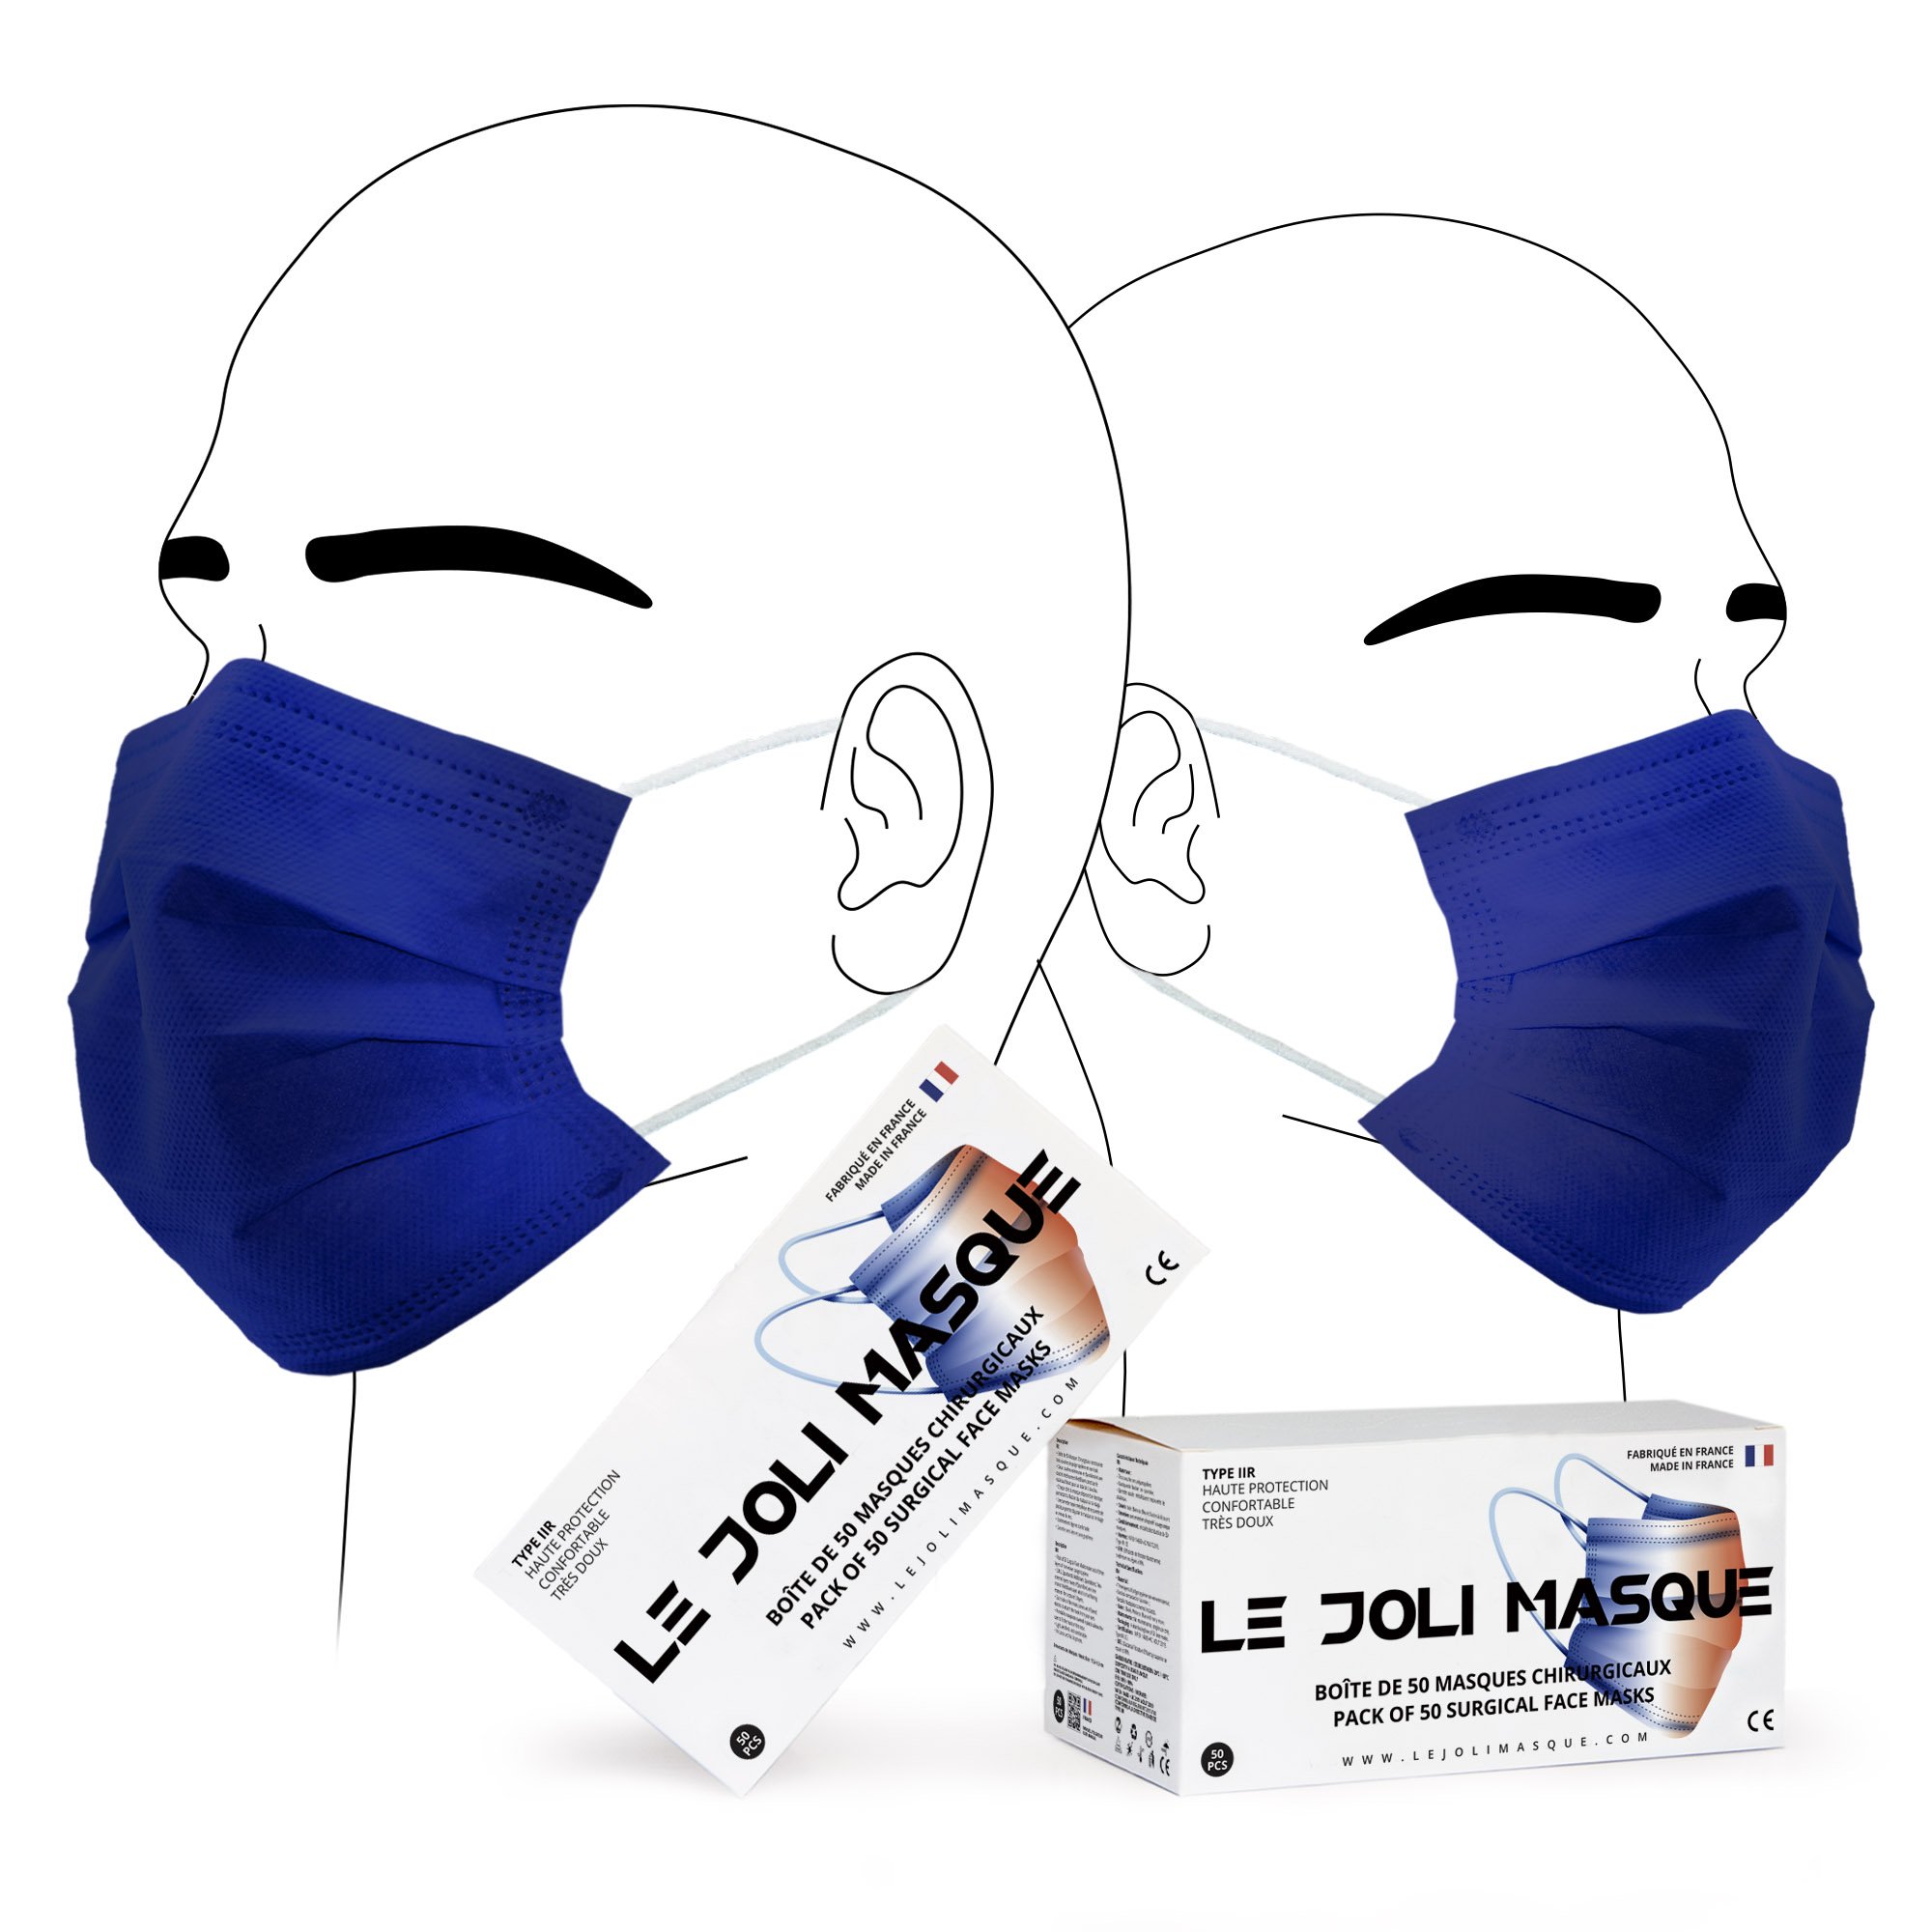 Pack de 50 - Masque Chirurgical type IIR Adulte